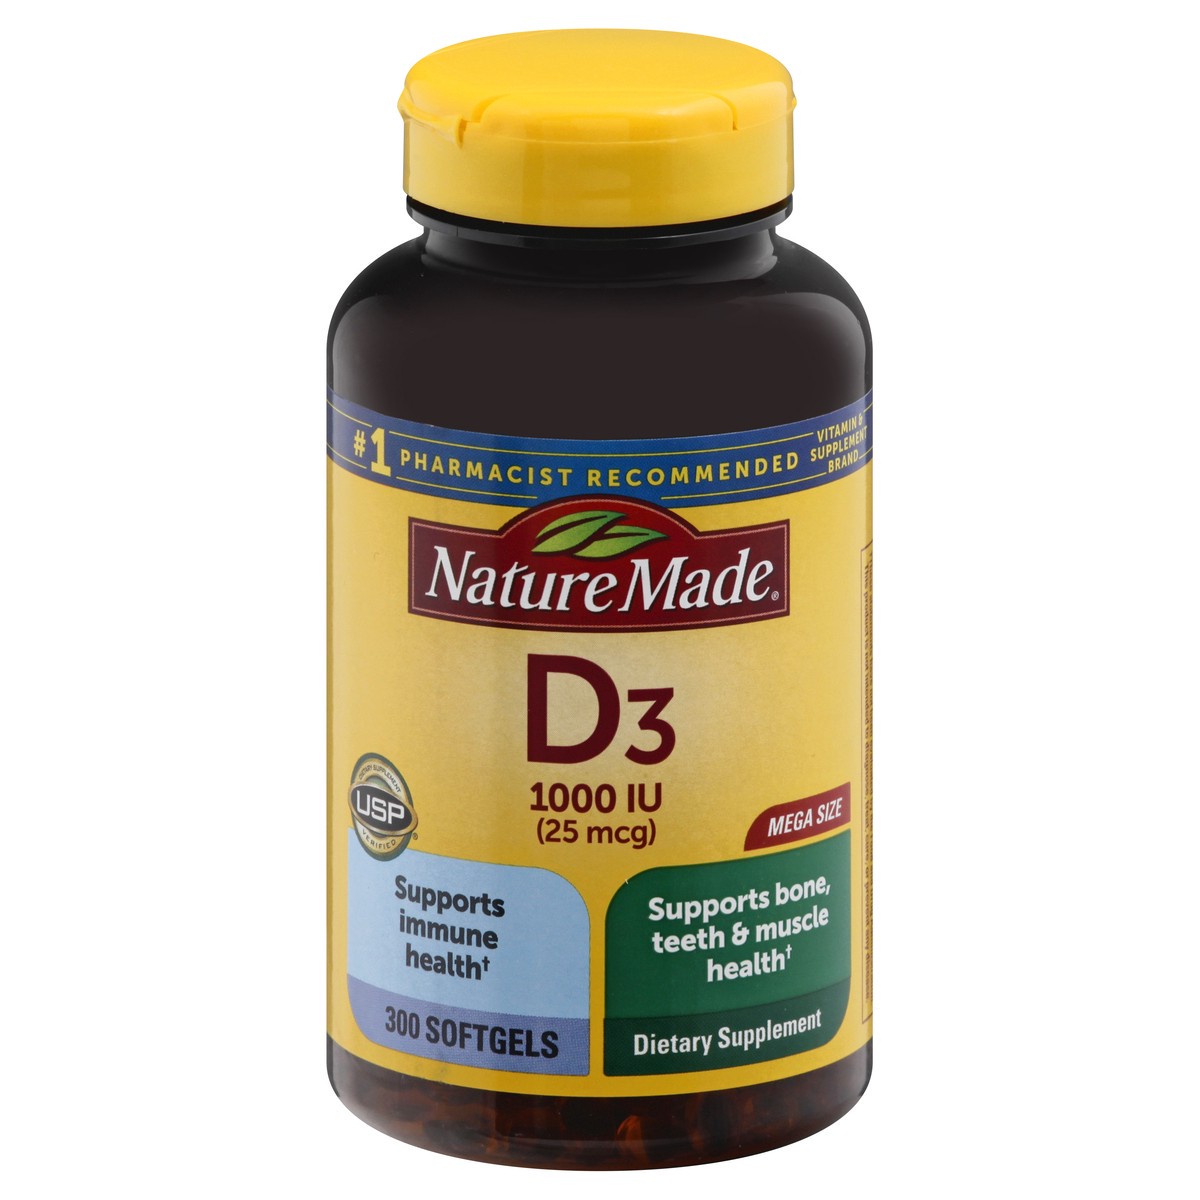 slide 1 of 12, Nature Made Vitamin D3 1000 IU (25 mcg), Dietary Supplement for Bone, Teeth, Muscle and Immune Health Support, 300 Softgels, 300 Day Supply, 300 ct